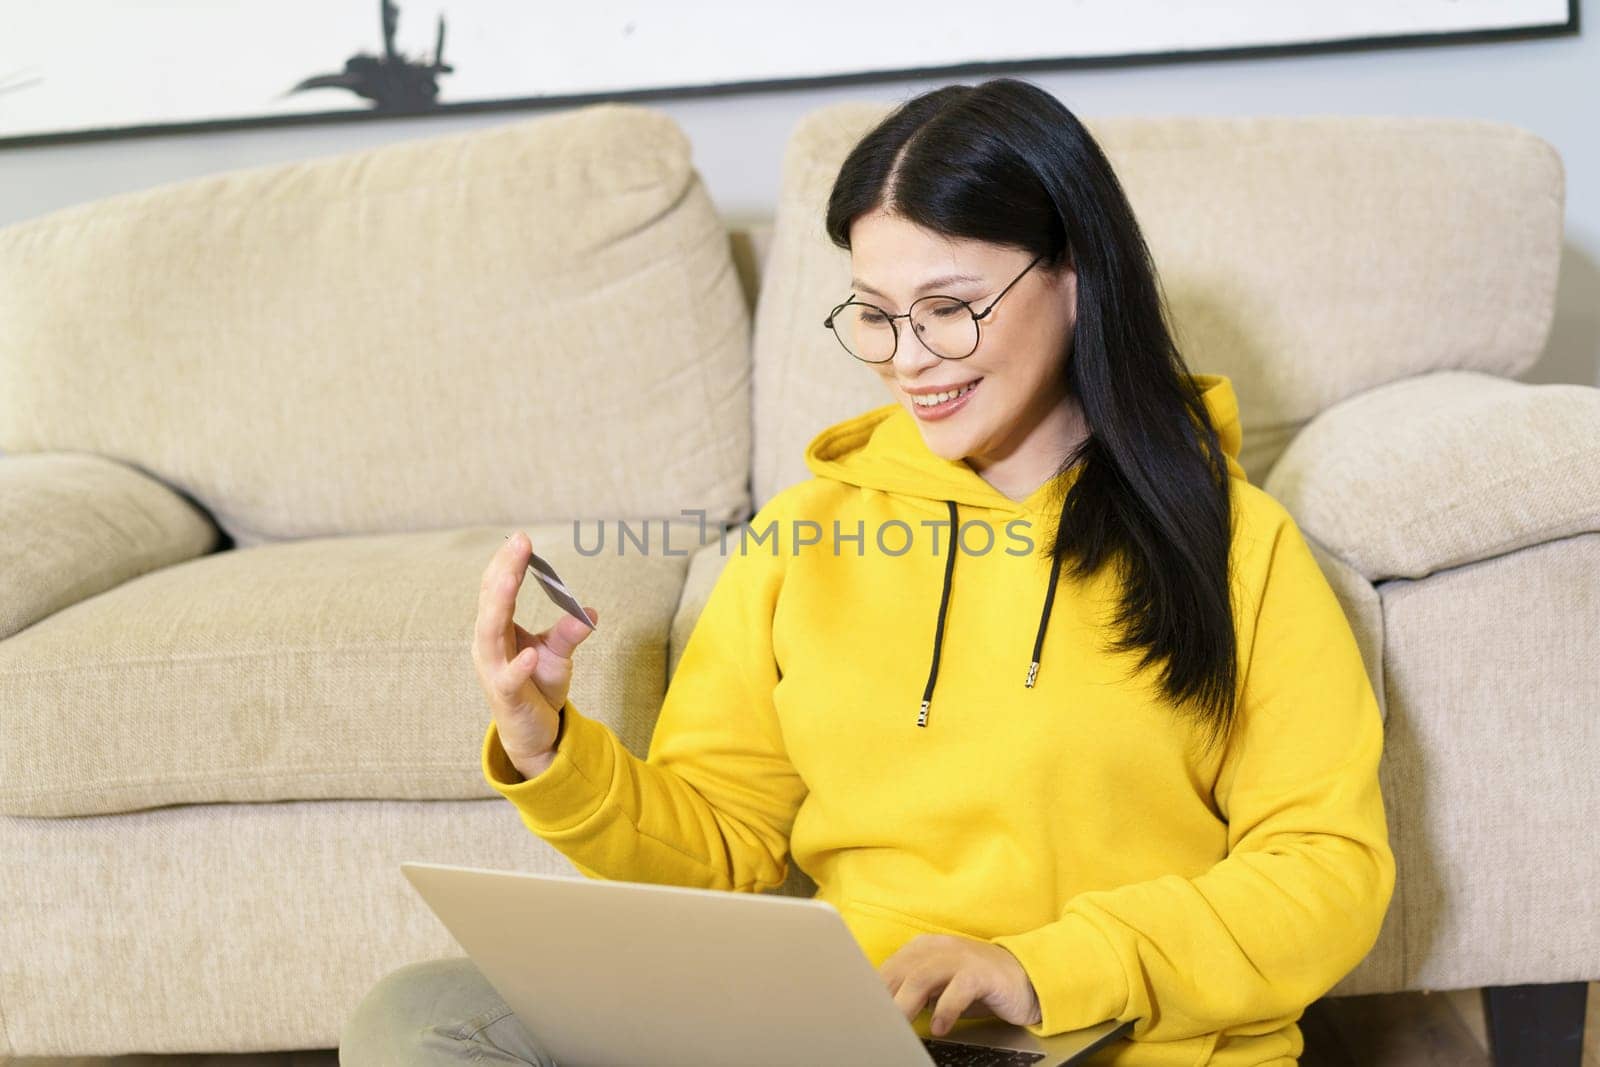 Asian woman comfortably shopping online from her home, with laptop on her lap and bank card in her hand. She is engaged in digital retail, using modern technology and the convenience of e-commerce to make purchase with her credit card. High quality photo